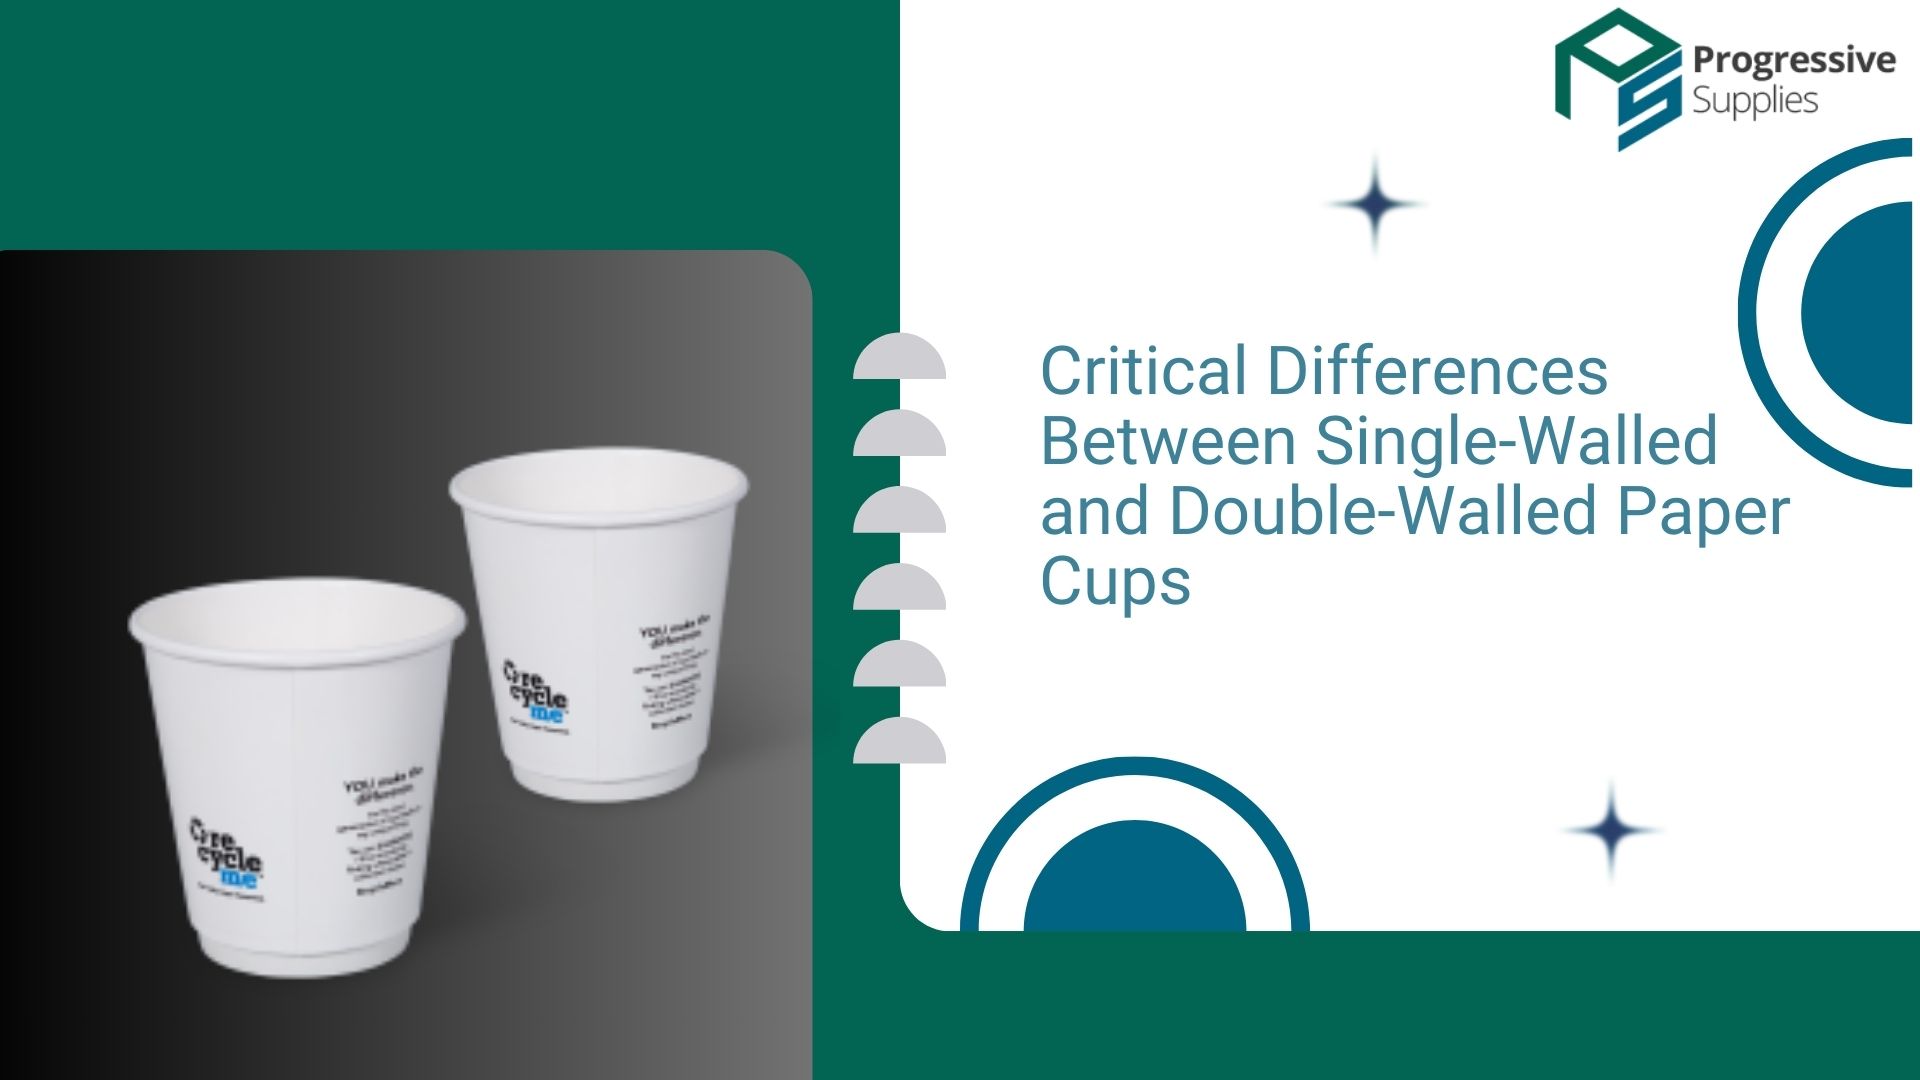 Critical Differences Between Single-Walled and Double-Walled Paper Cups